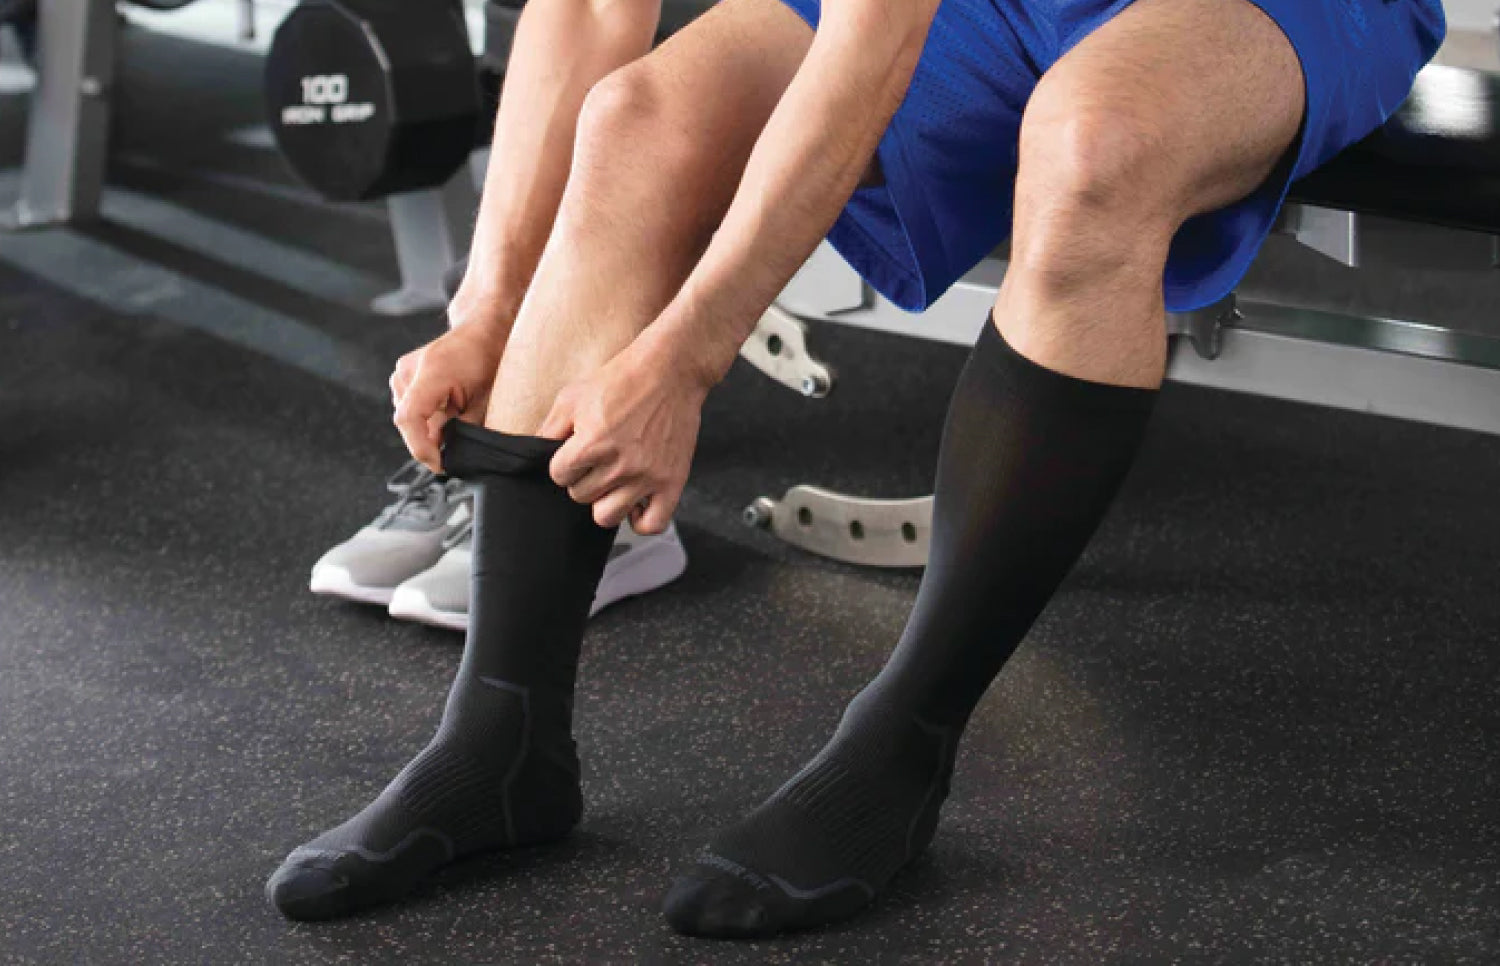 Benefits of Wearing Compression Stockings for Varicose Veins